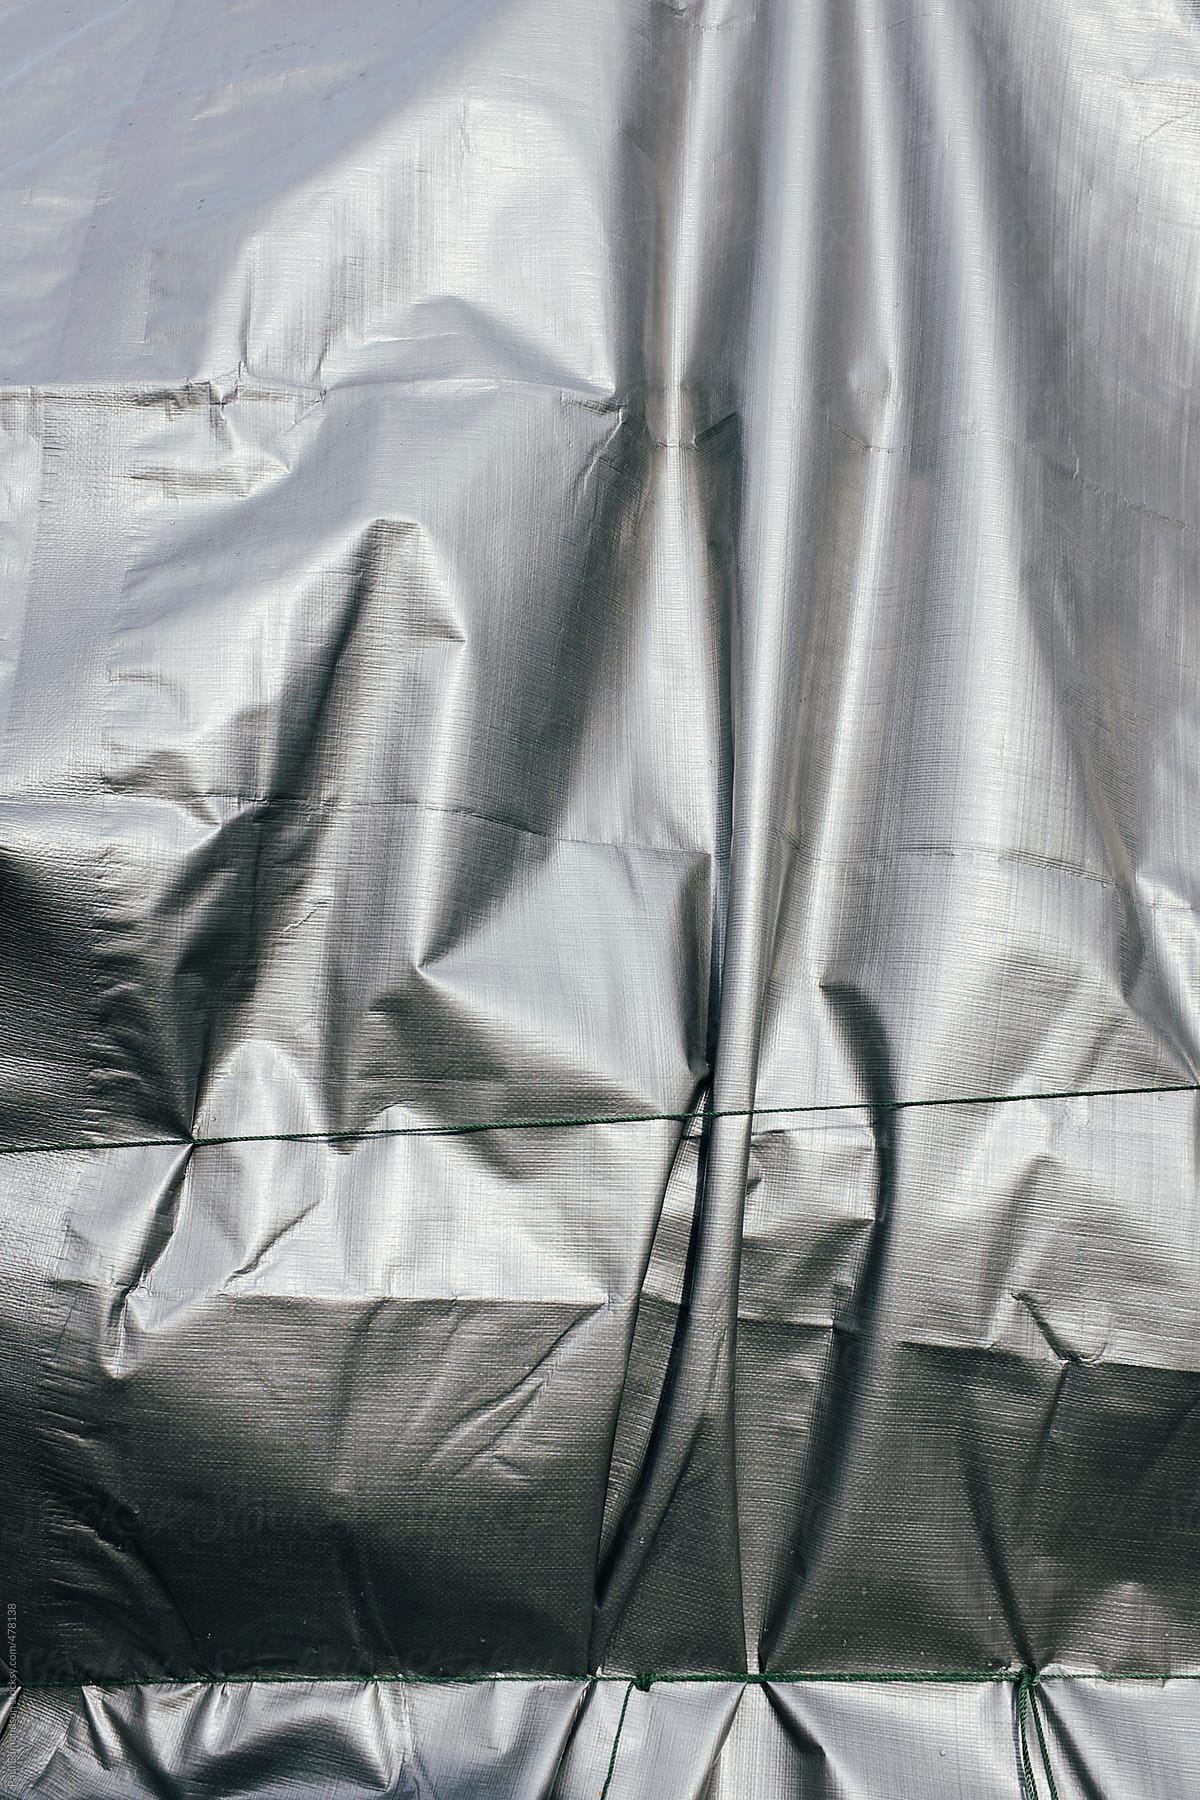 Closeup of silver tarpaulin covering pile of commercial fishing equipment